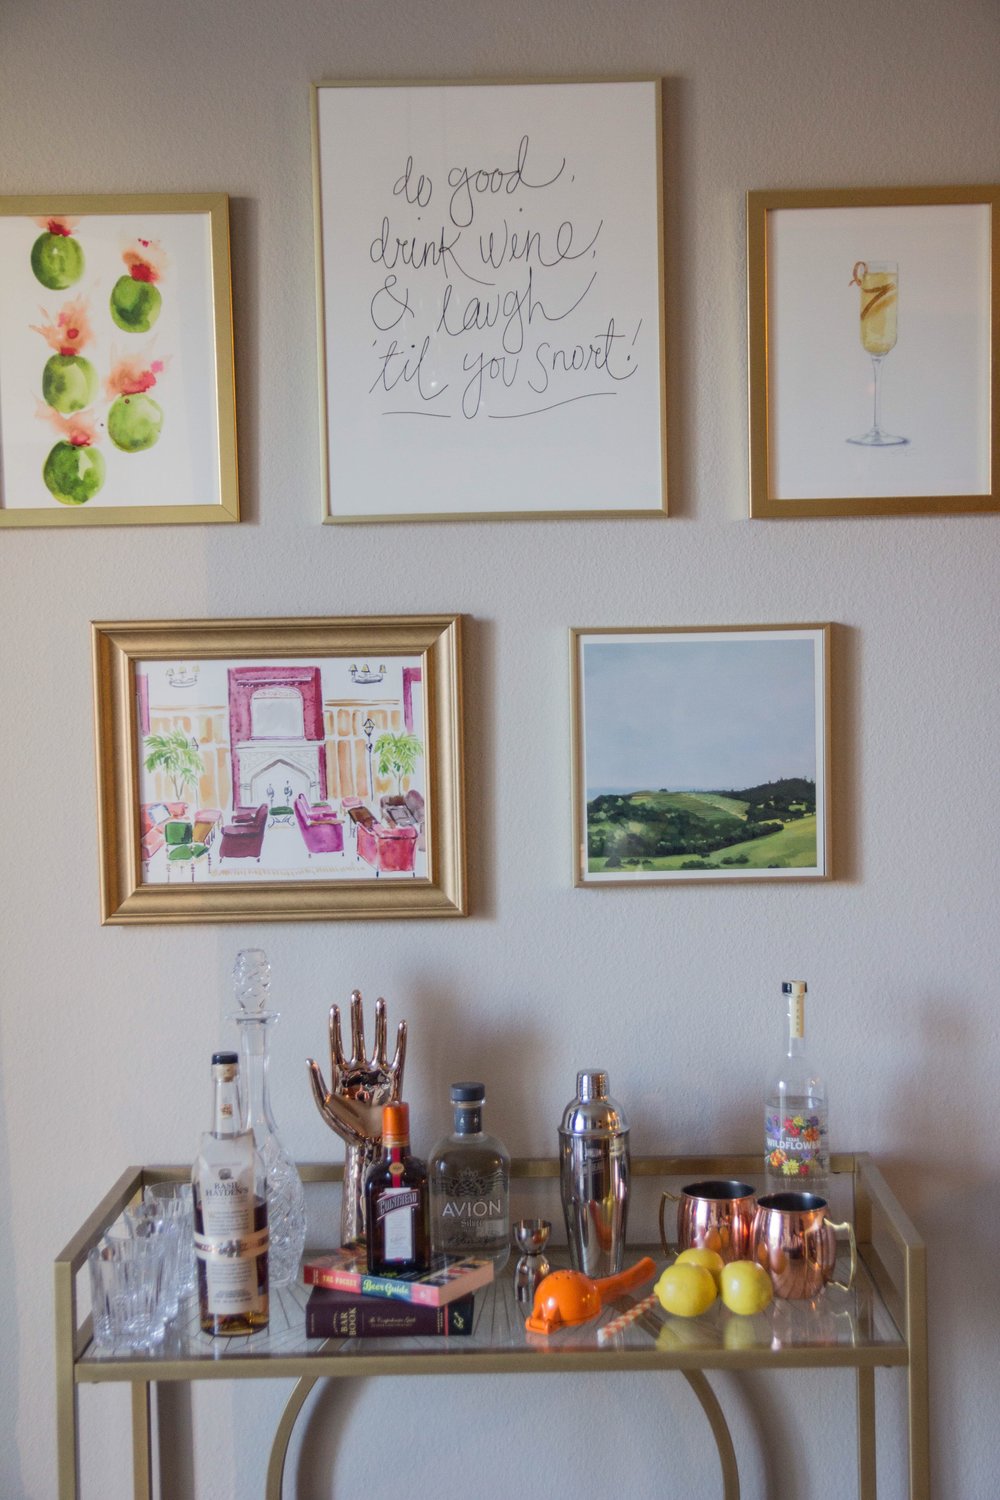 How to Decorate a Bar Cart Gallery Wall   LMents of Style ...